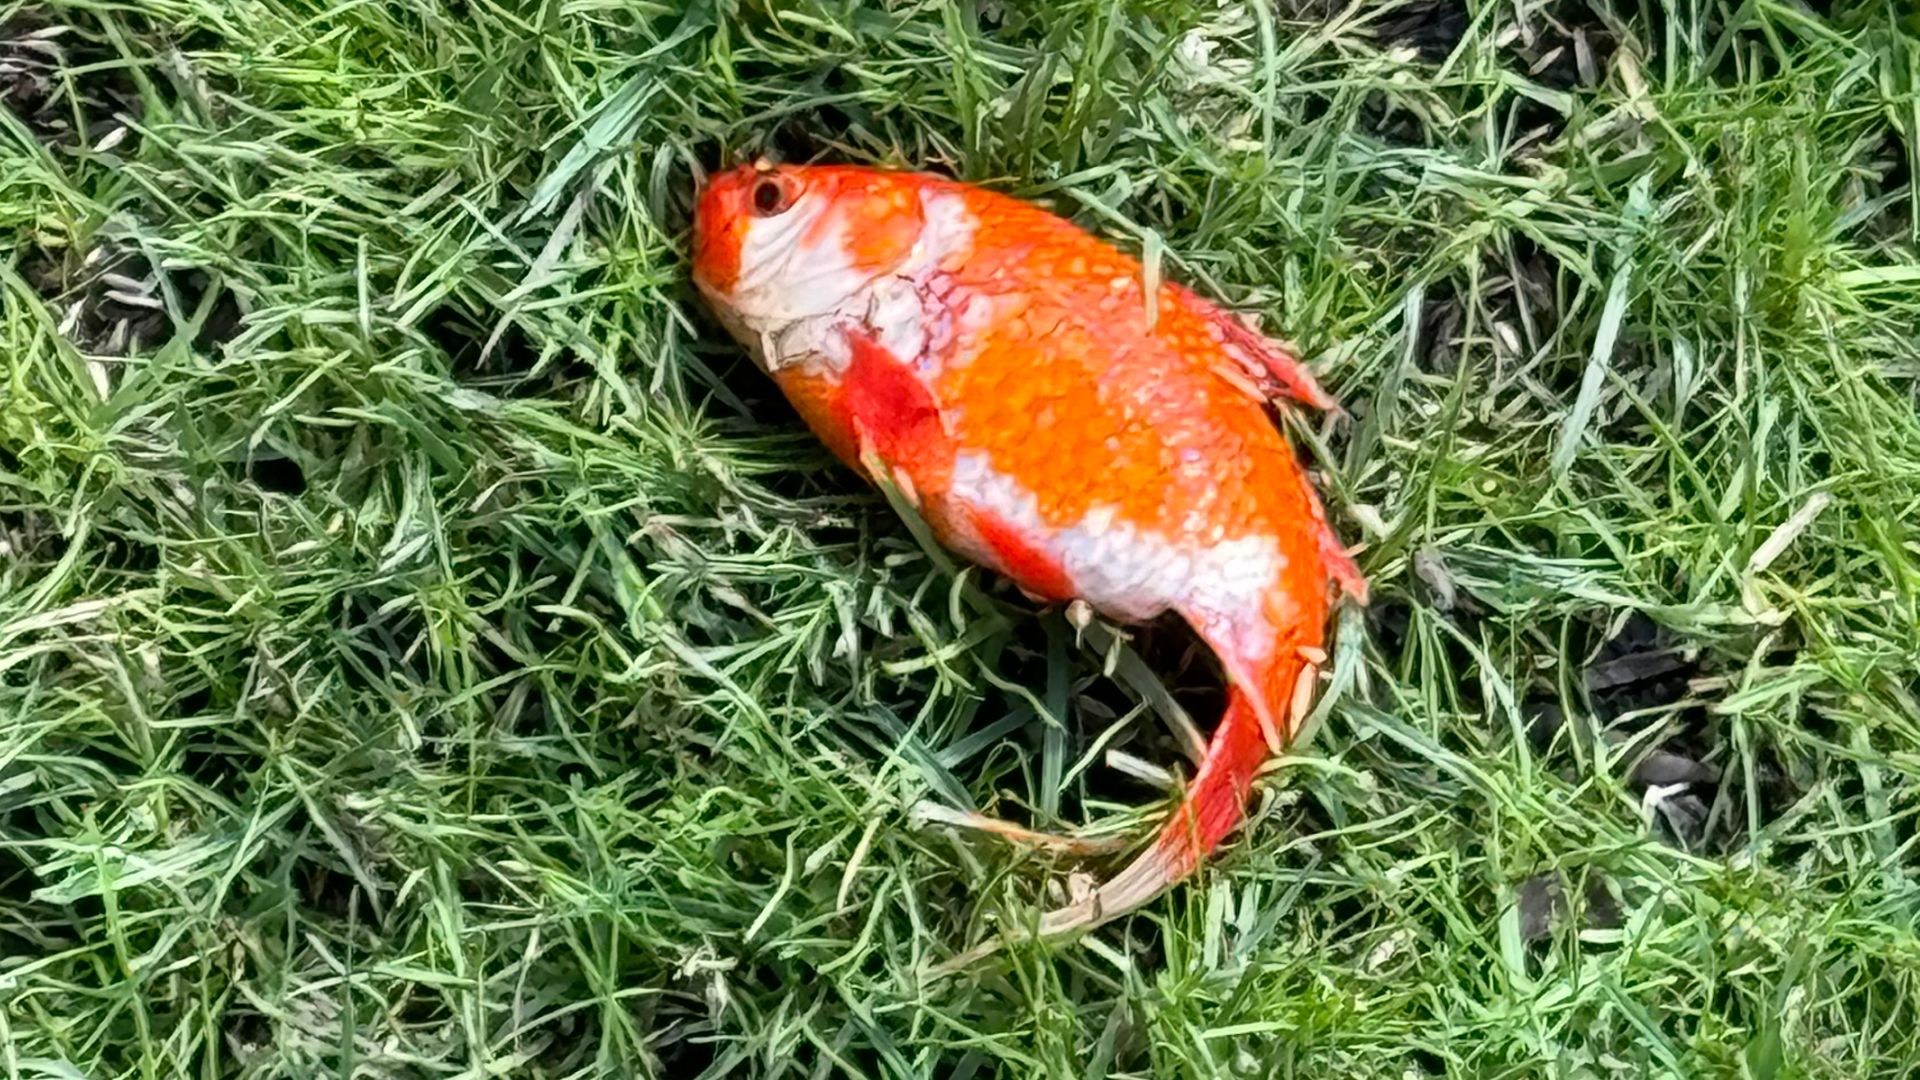 Doctor discovers mystery fish on garden lawn - and keeps as pet